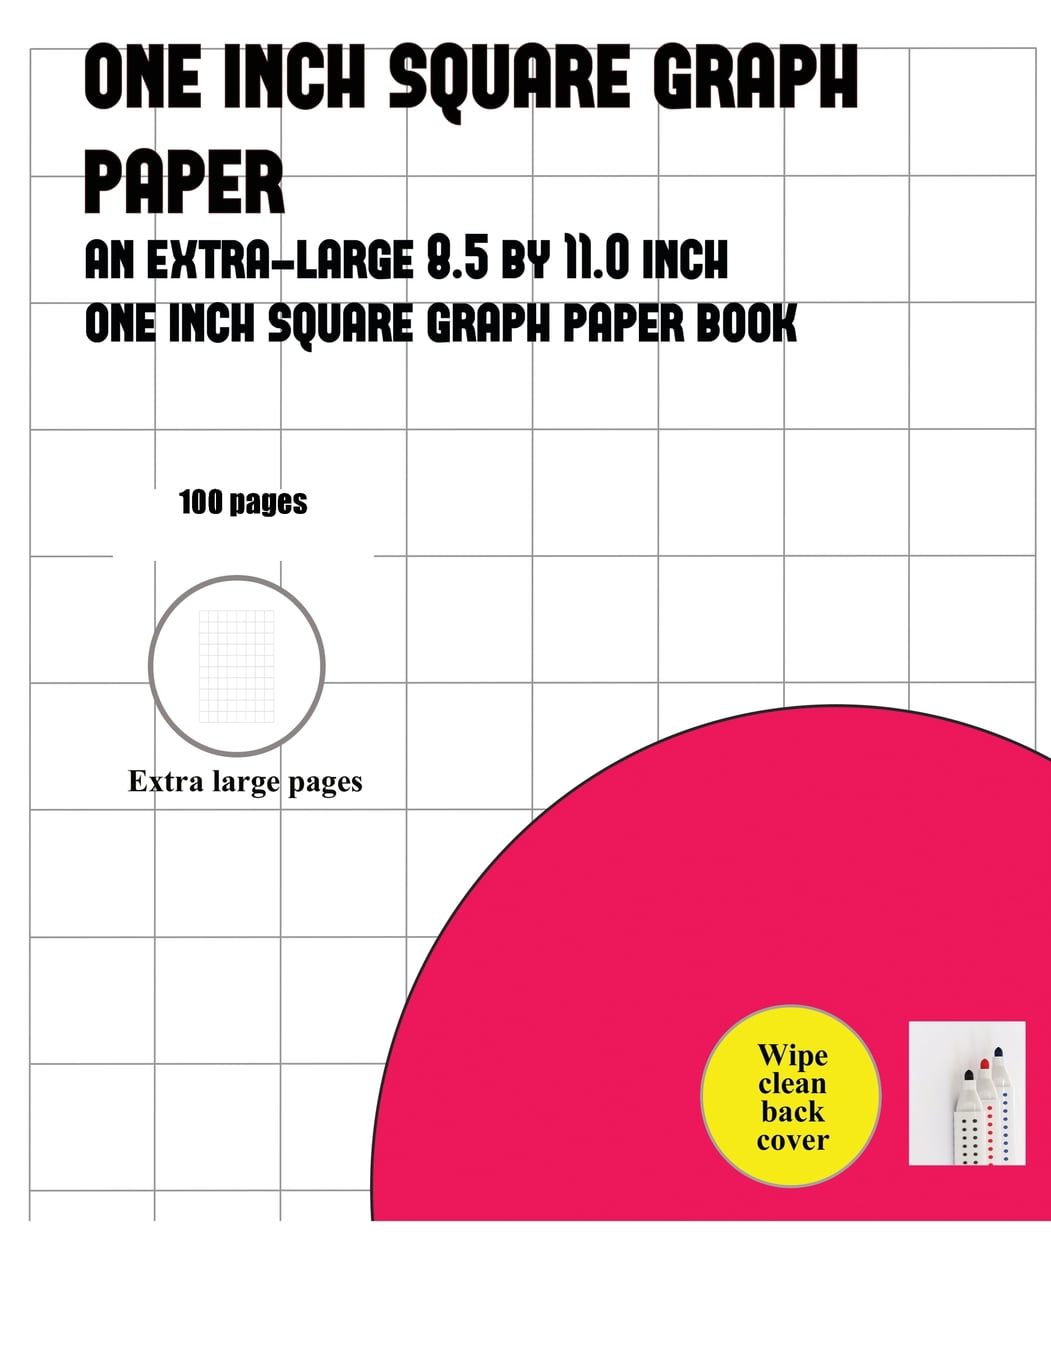 one-inch-square-graph-paper-book-one-inch-square-graph-paper-book